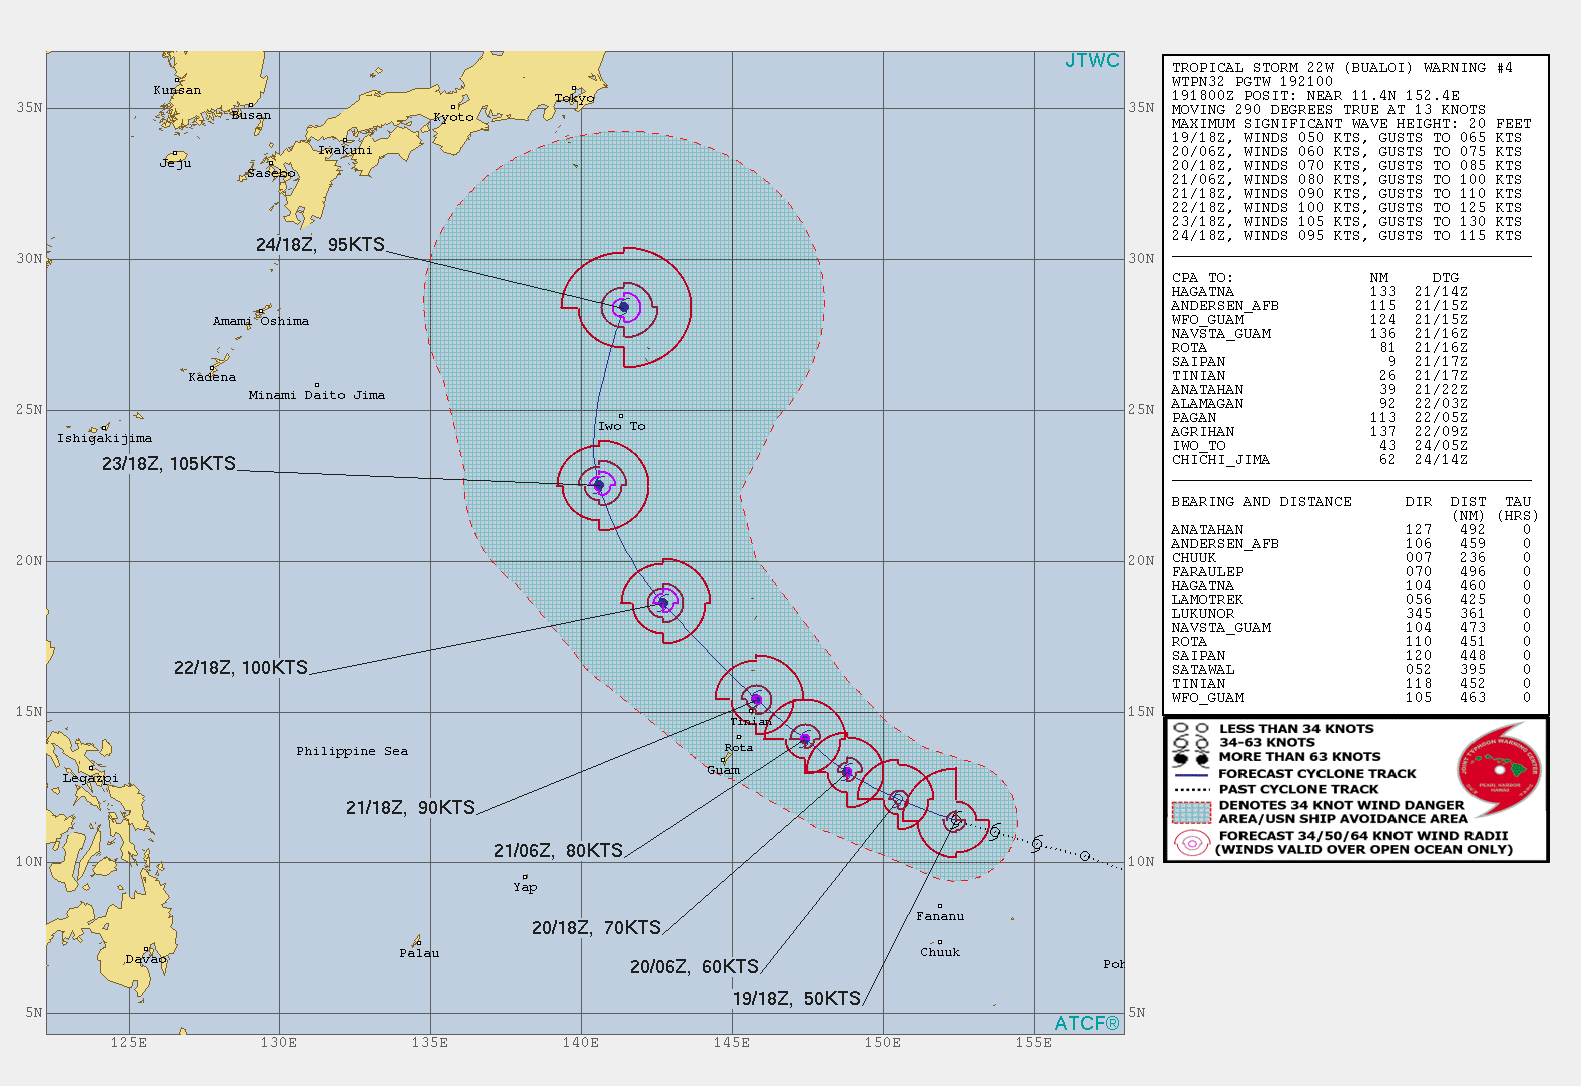 22W: FORECAST TO REACH TYPHOON INTENSITY WITHIN 24H